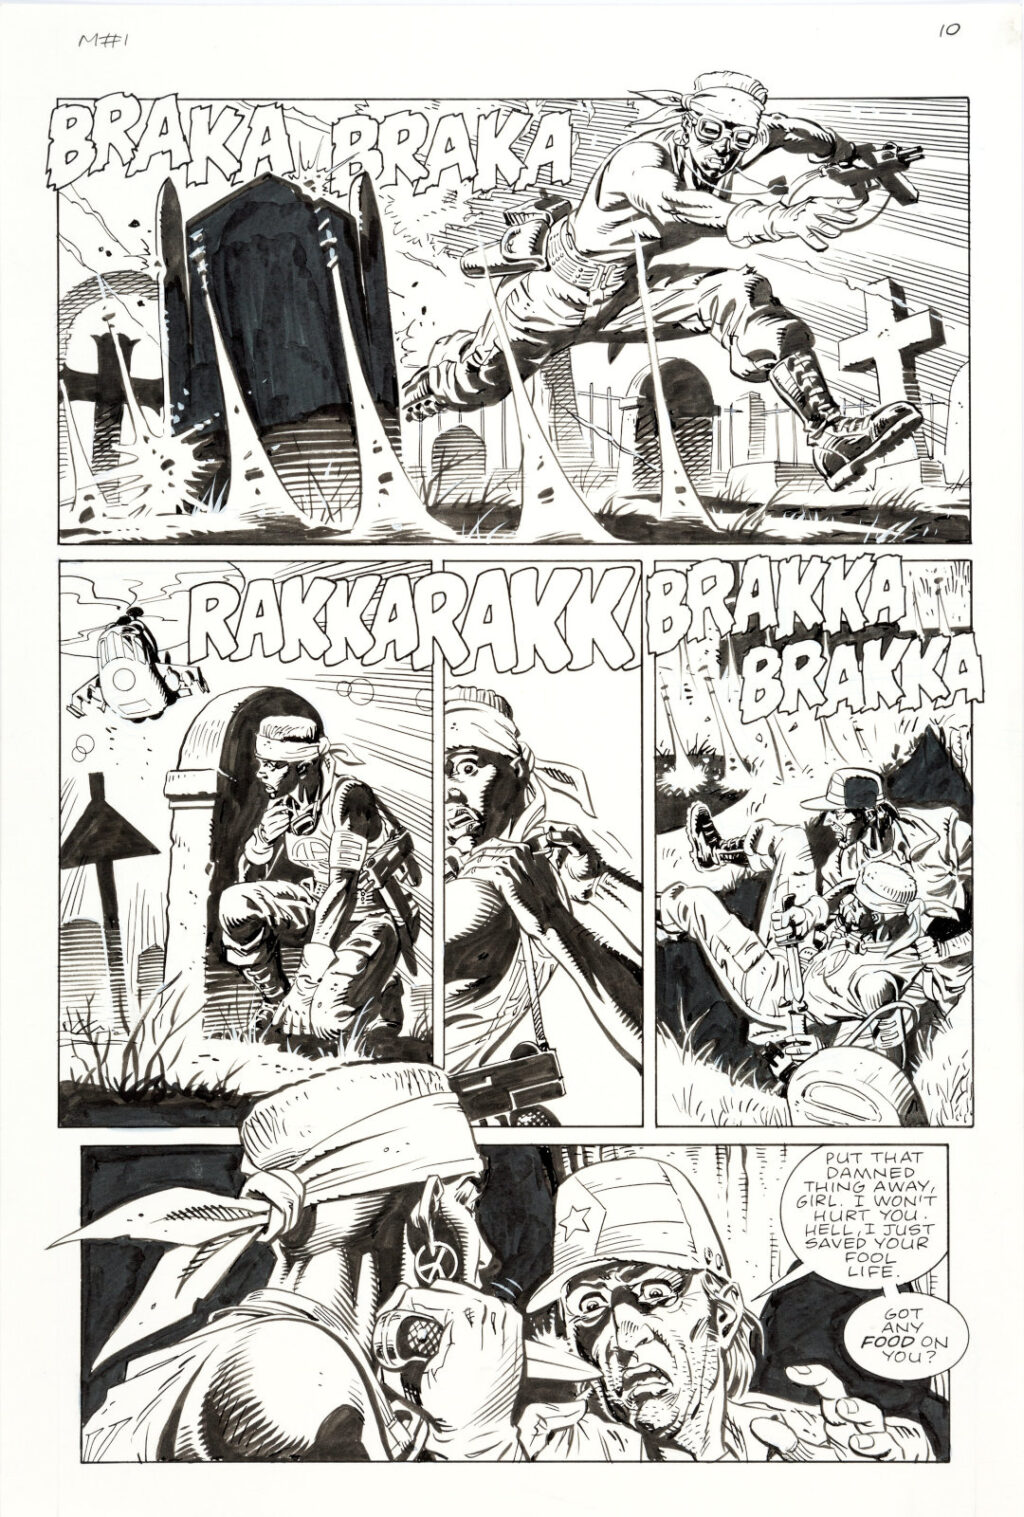 Martha Washington Goes To War issue 1 page 10 by Dave Gibbons